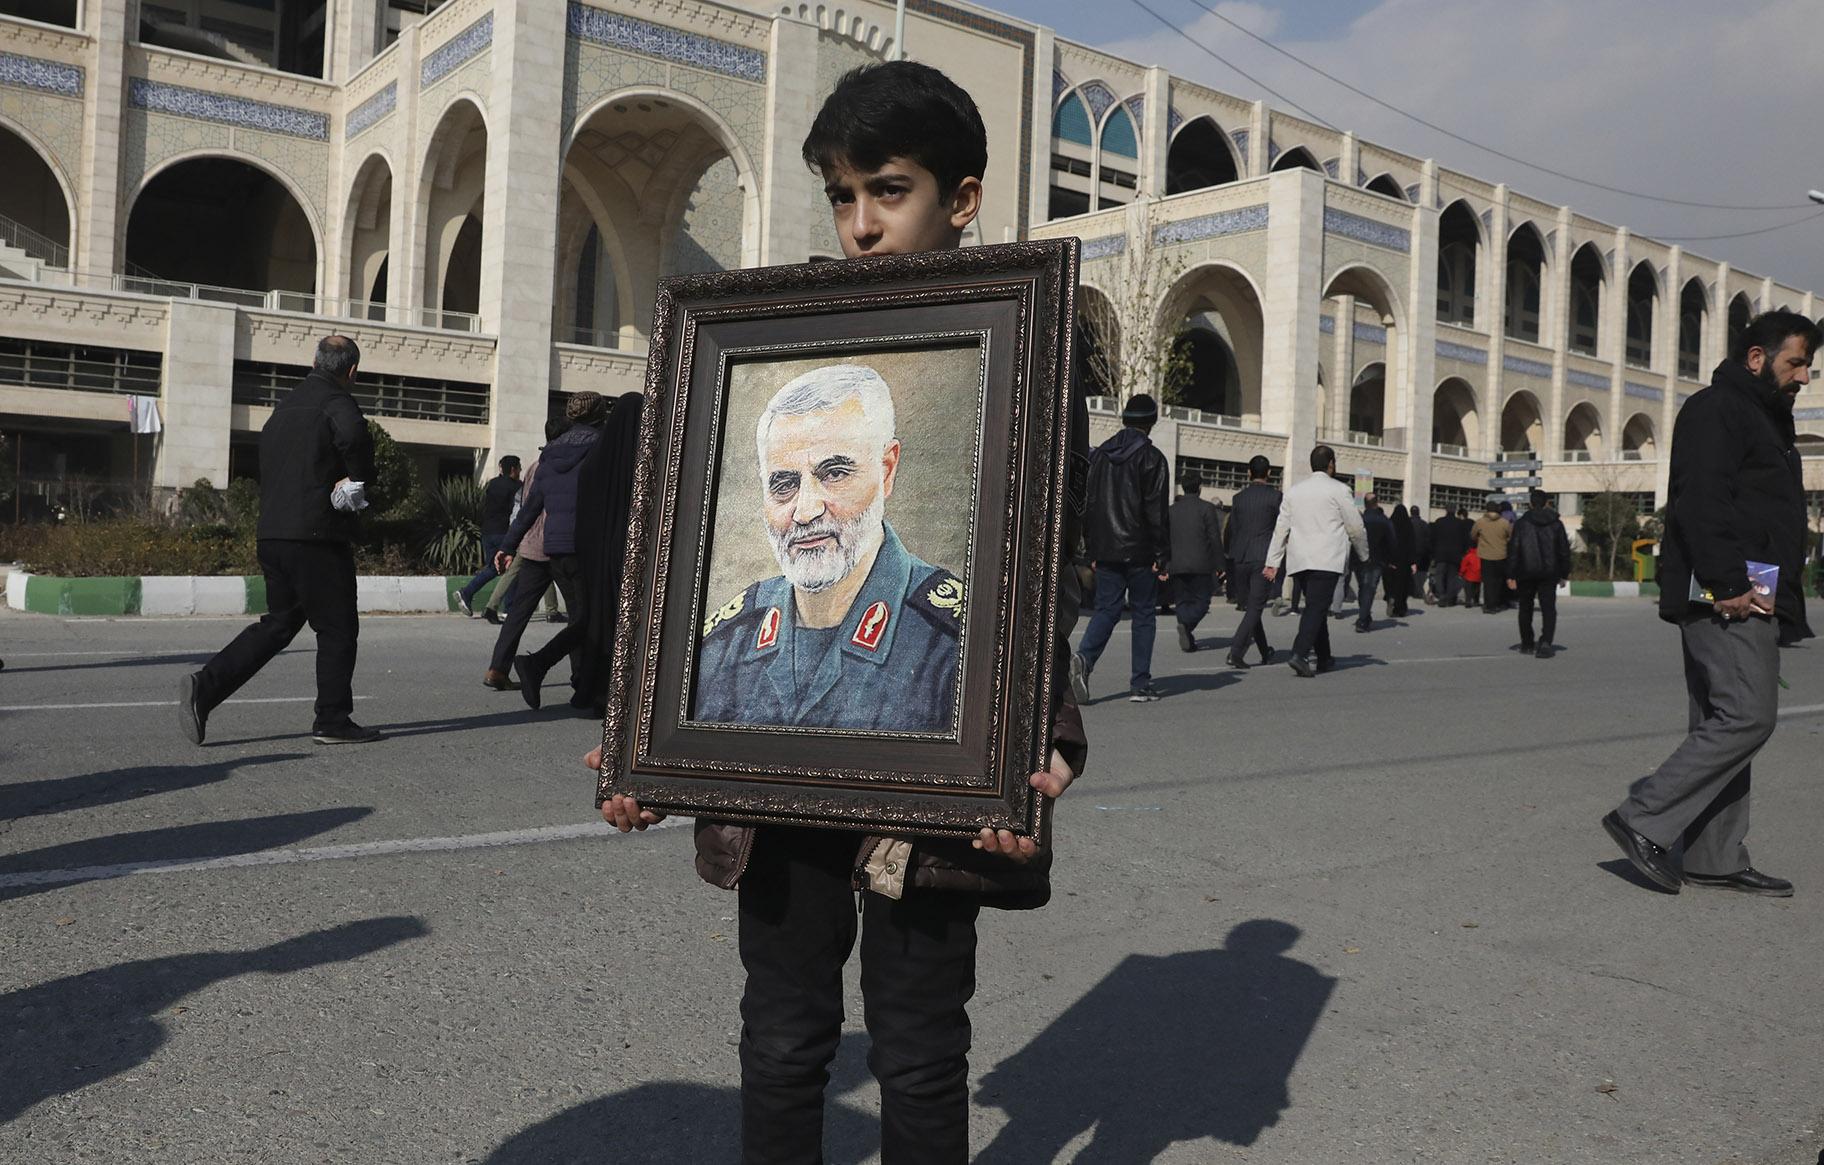 A boy carries a portrait of Iranian Revolutionary Guard Gen. Qassem Soleimani, who was killed in the U.S. airstrike in Iraq, prior to the Friday prayers in Tehran, Iran, Friday Jan. 3, 2020. (AP Photo / Vahid Salemi)